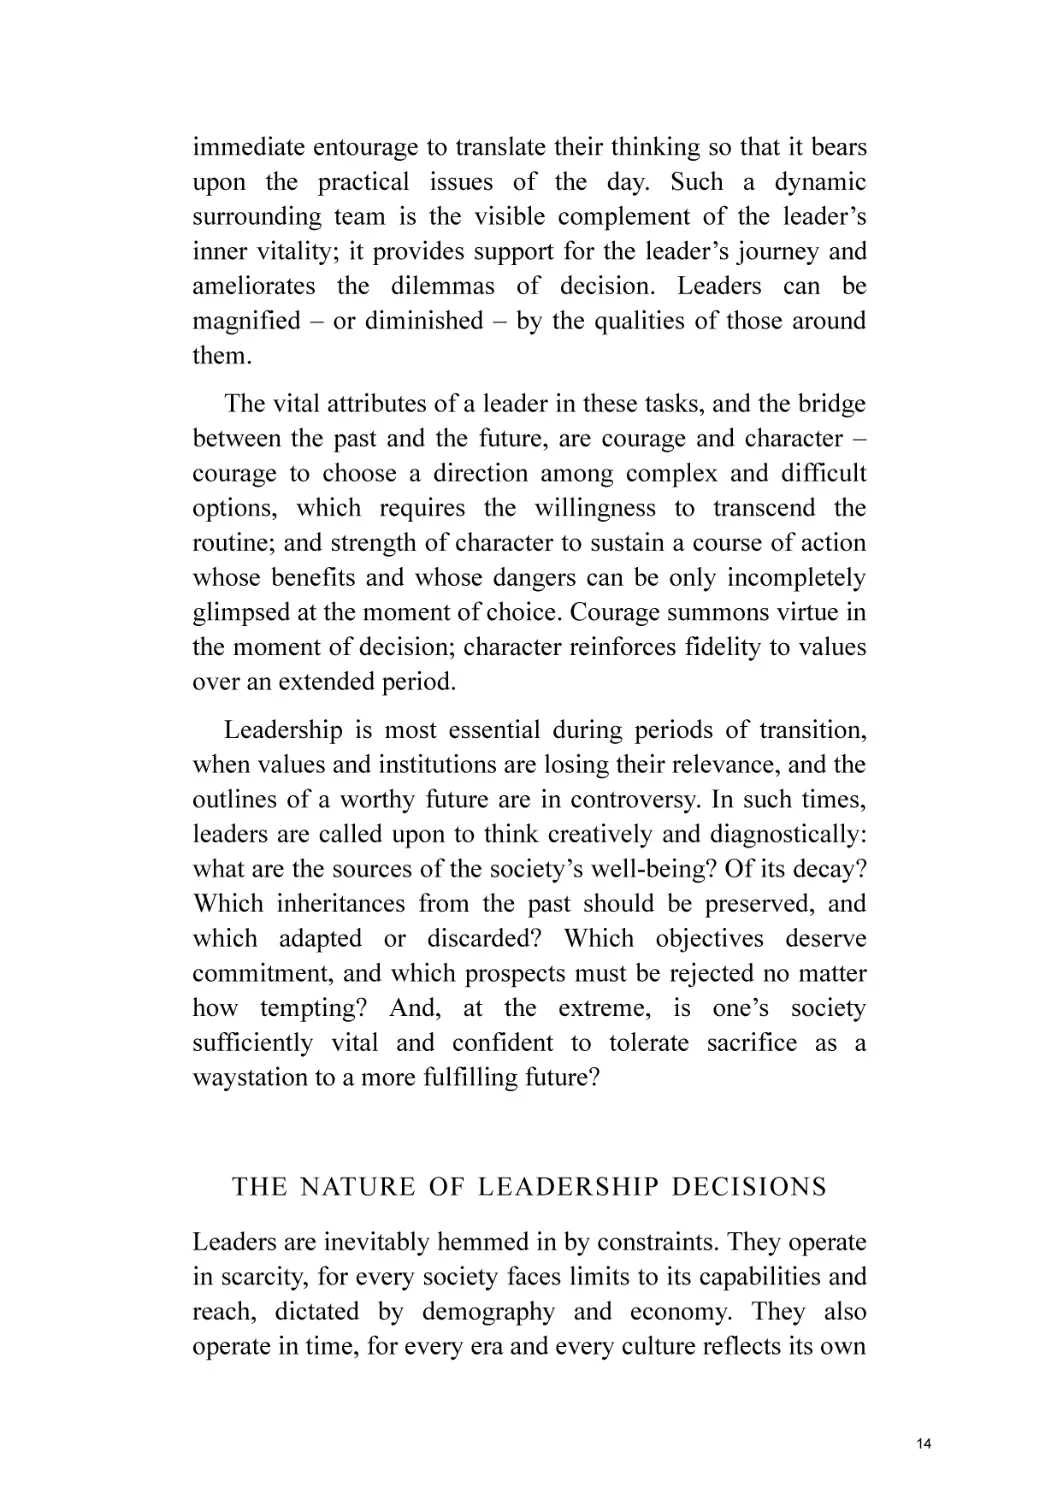 The Nature of Leadership Decisions